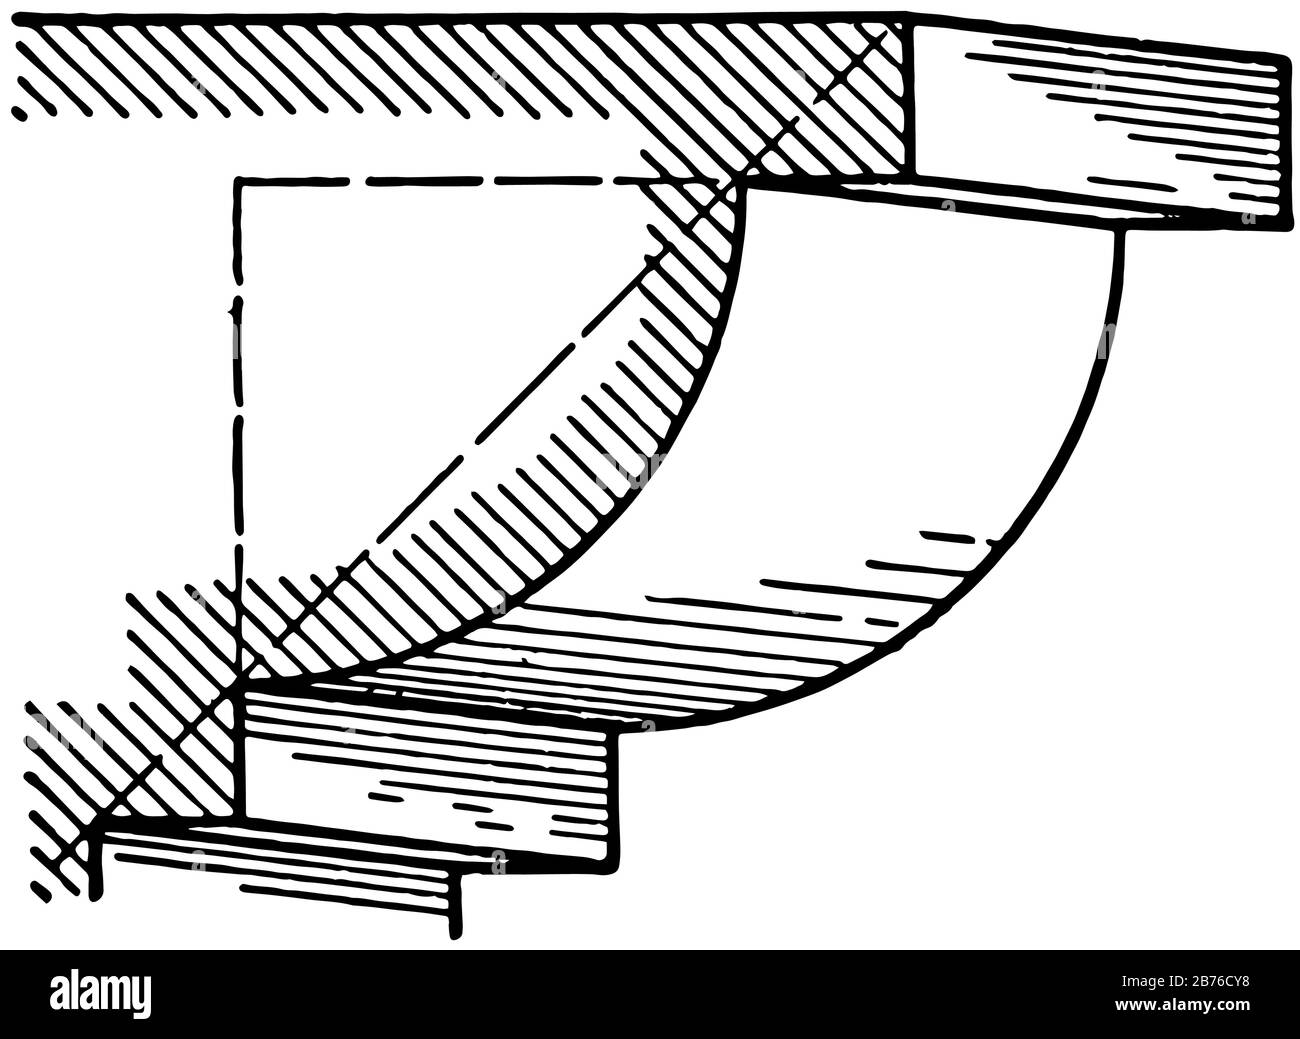 Ovolo, A roman moulding, composed of a quarter of a circle, an upper and lower fillet,  made apparent by referring to the figure, vintage line drawing Stock Vector